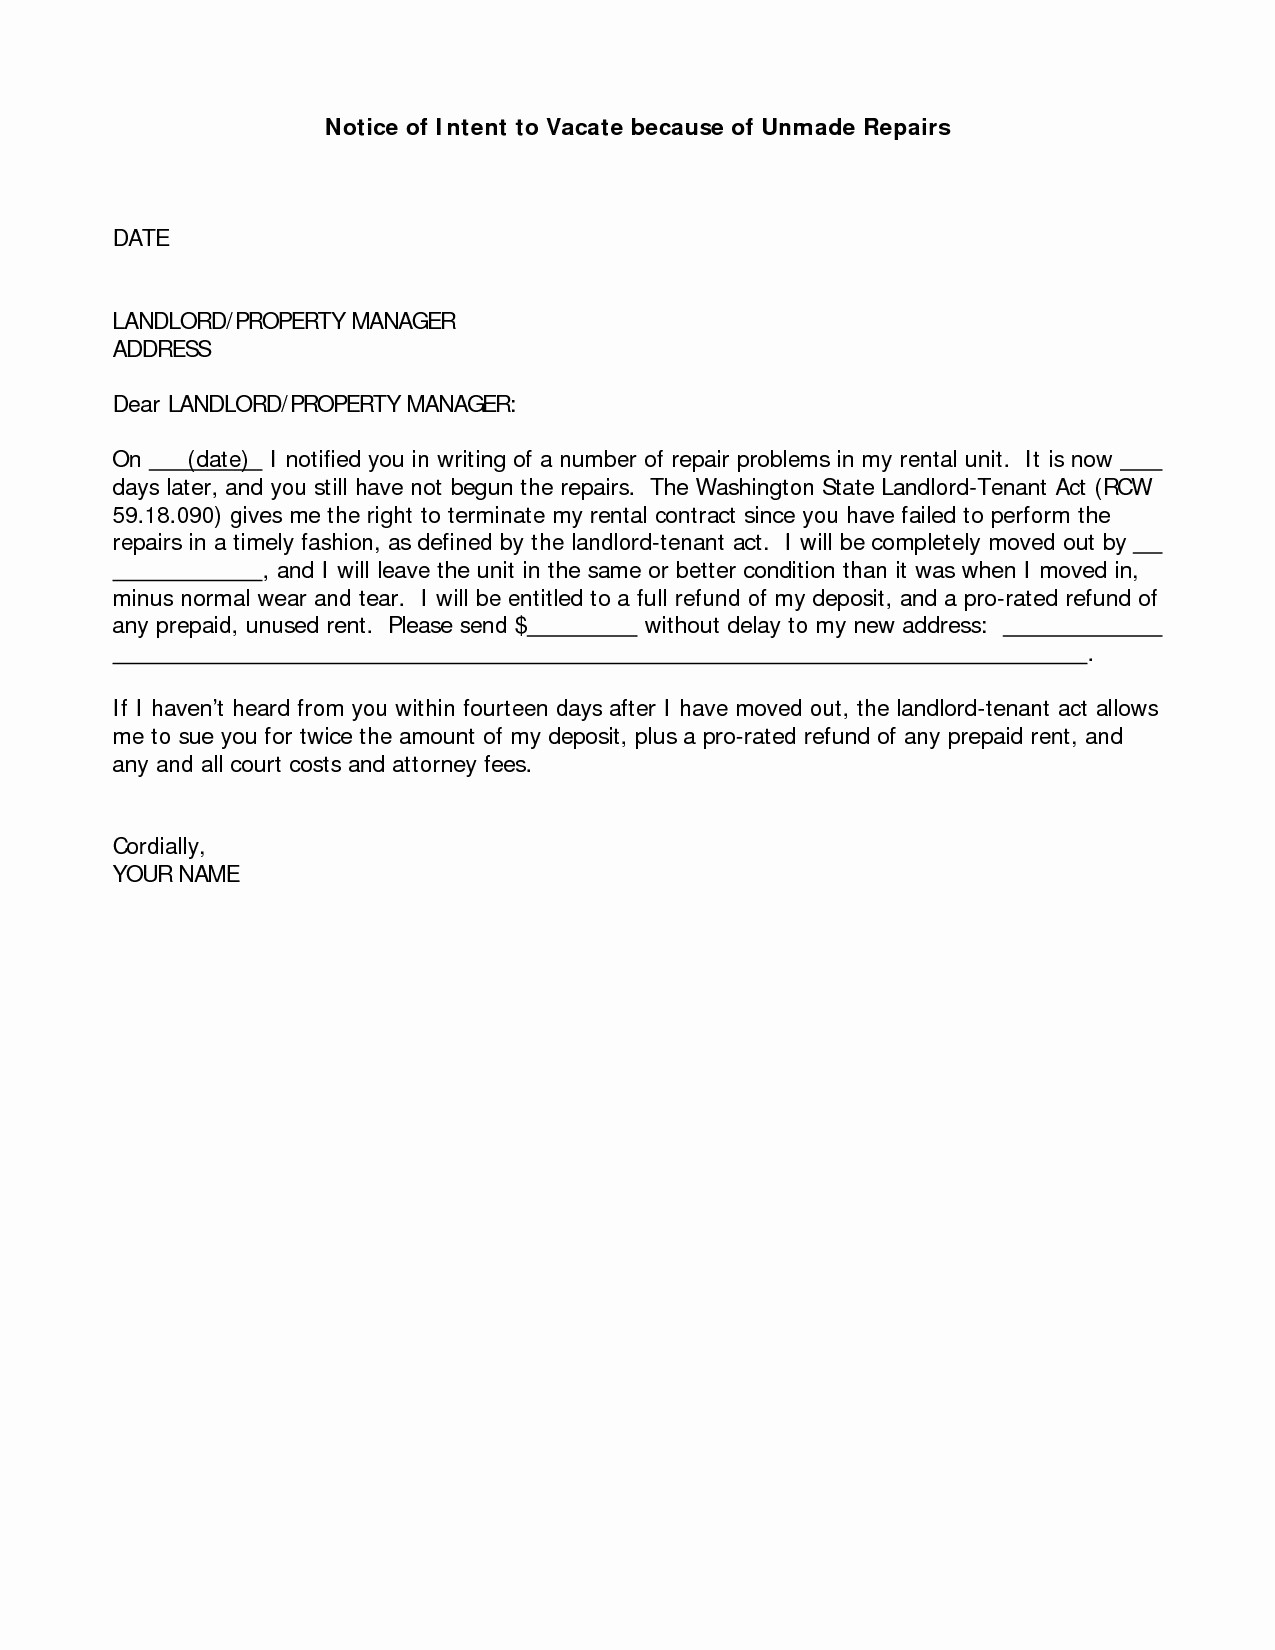 Letter to Tenant About Repairs Unique Sample Letter Moving Out Apartment Latest Bestapartment 2018